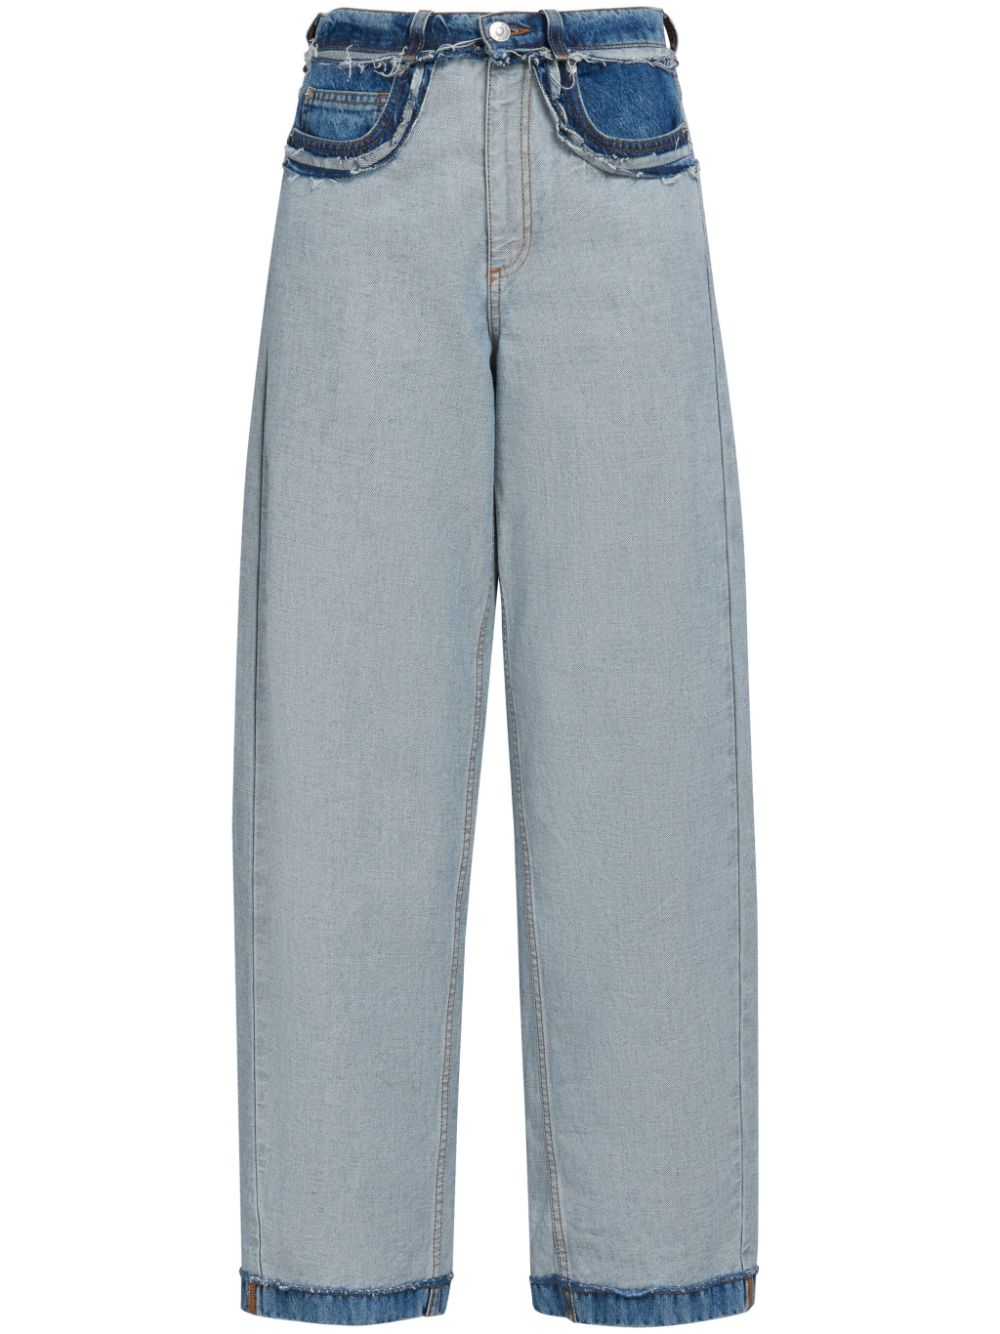 MARNI Blue Denim Jeans with Contrast Stitching Details